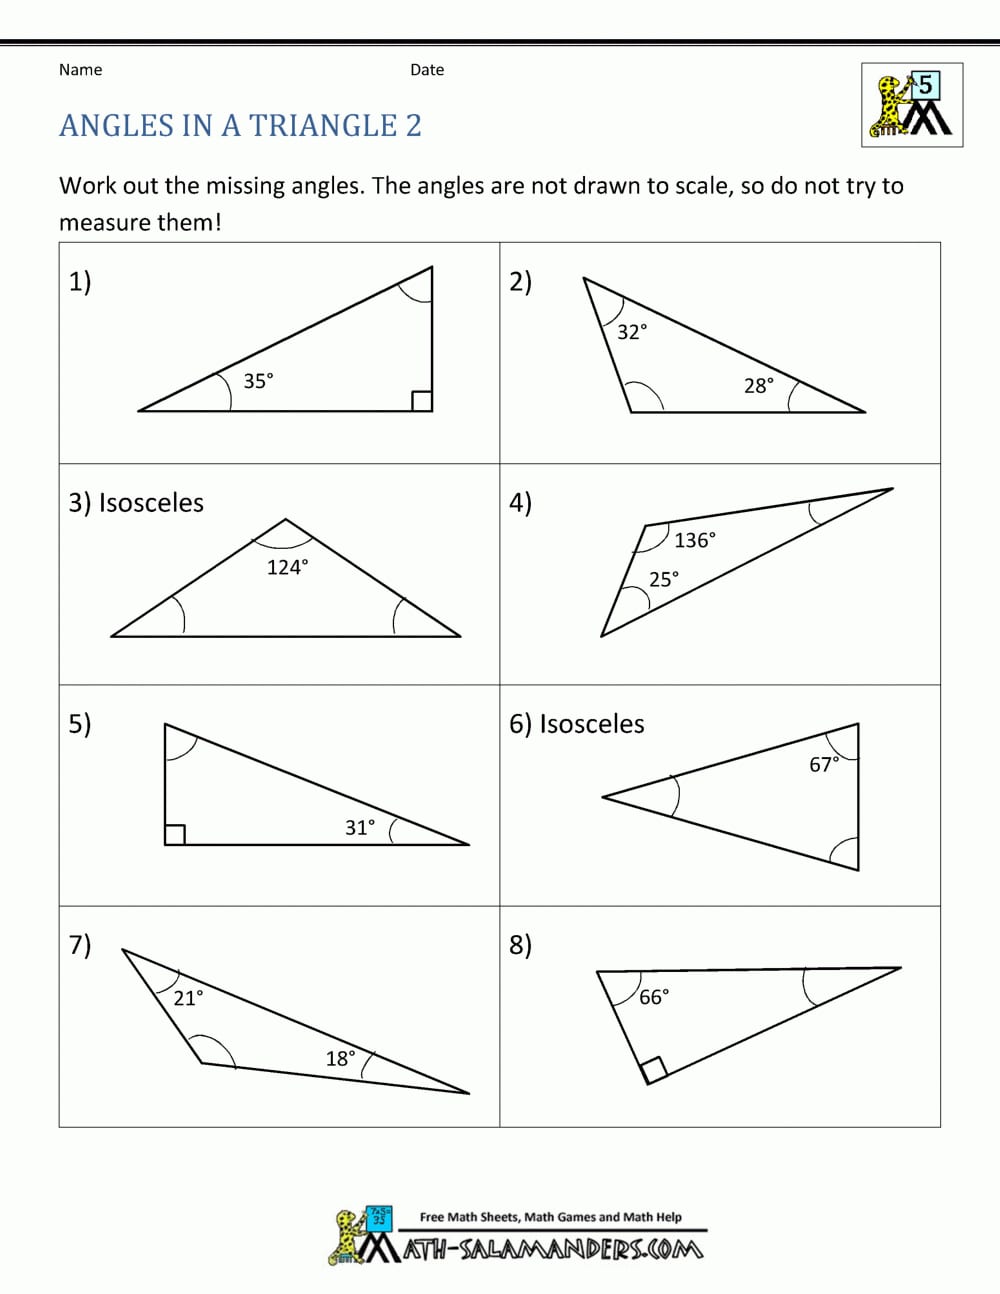 angles-on-a-straight-line-worksheet-db-excel